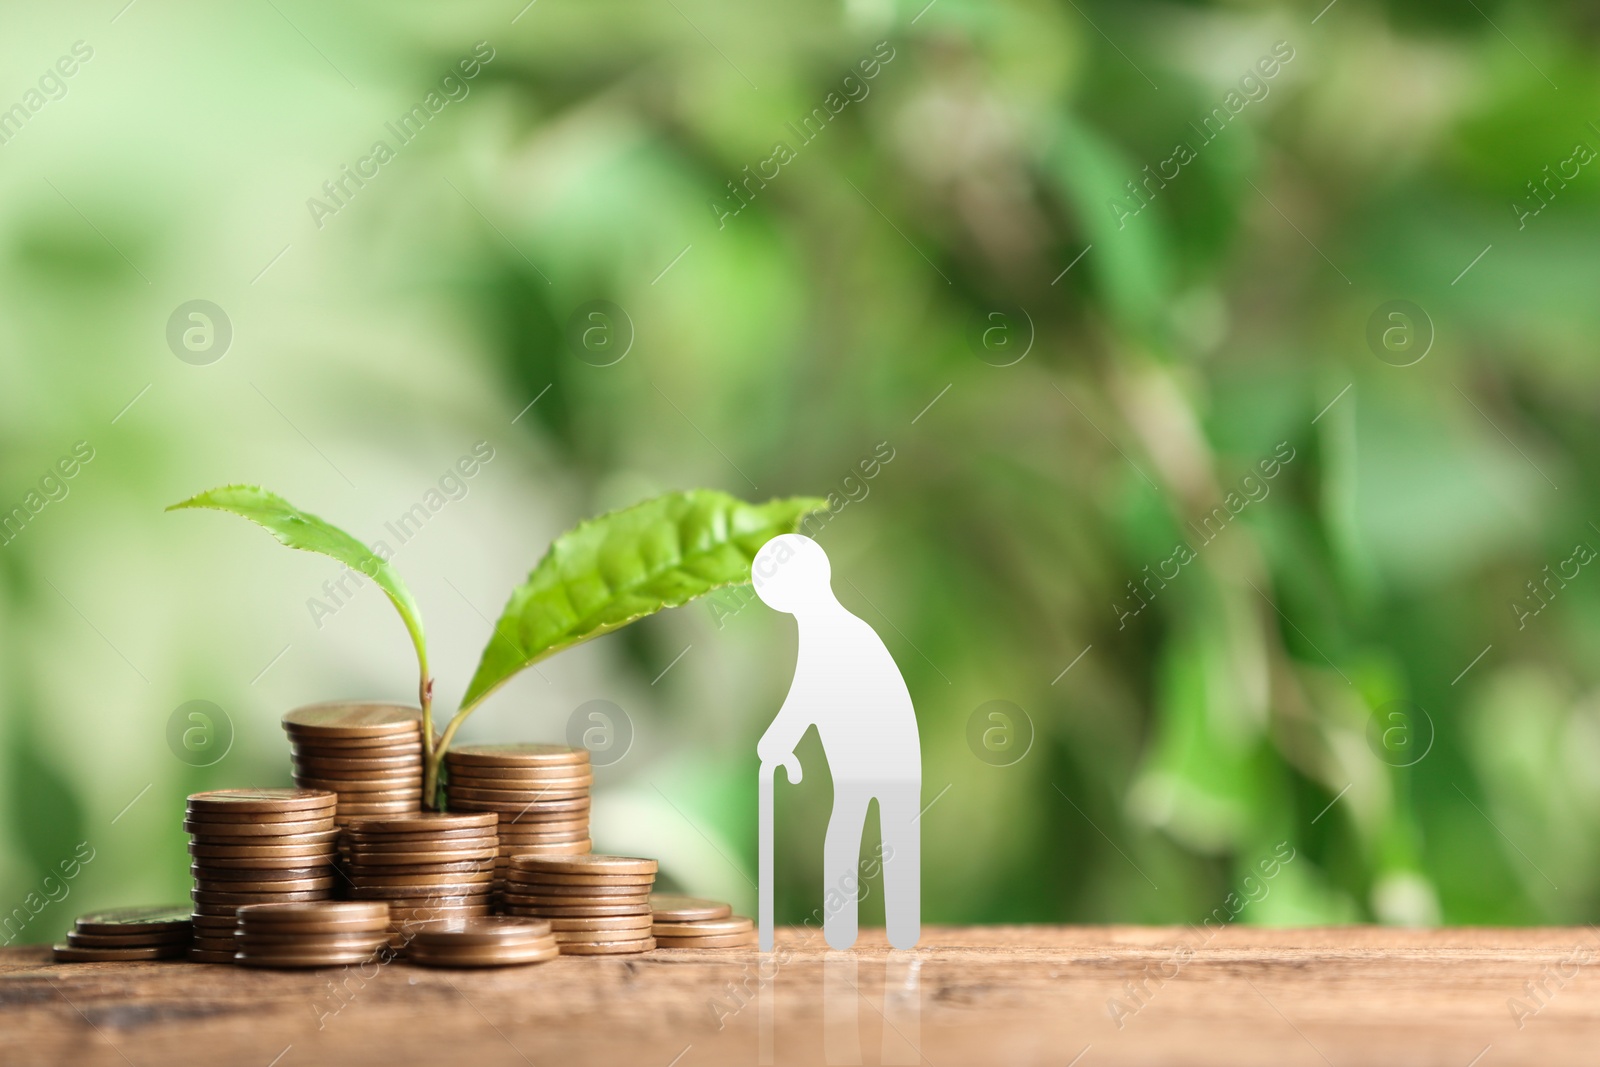 Image of Pension concept. Elderly man illustration, coins and sprout on wooden table. Space for text